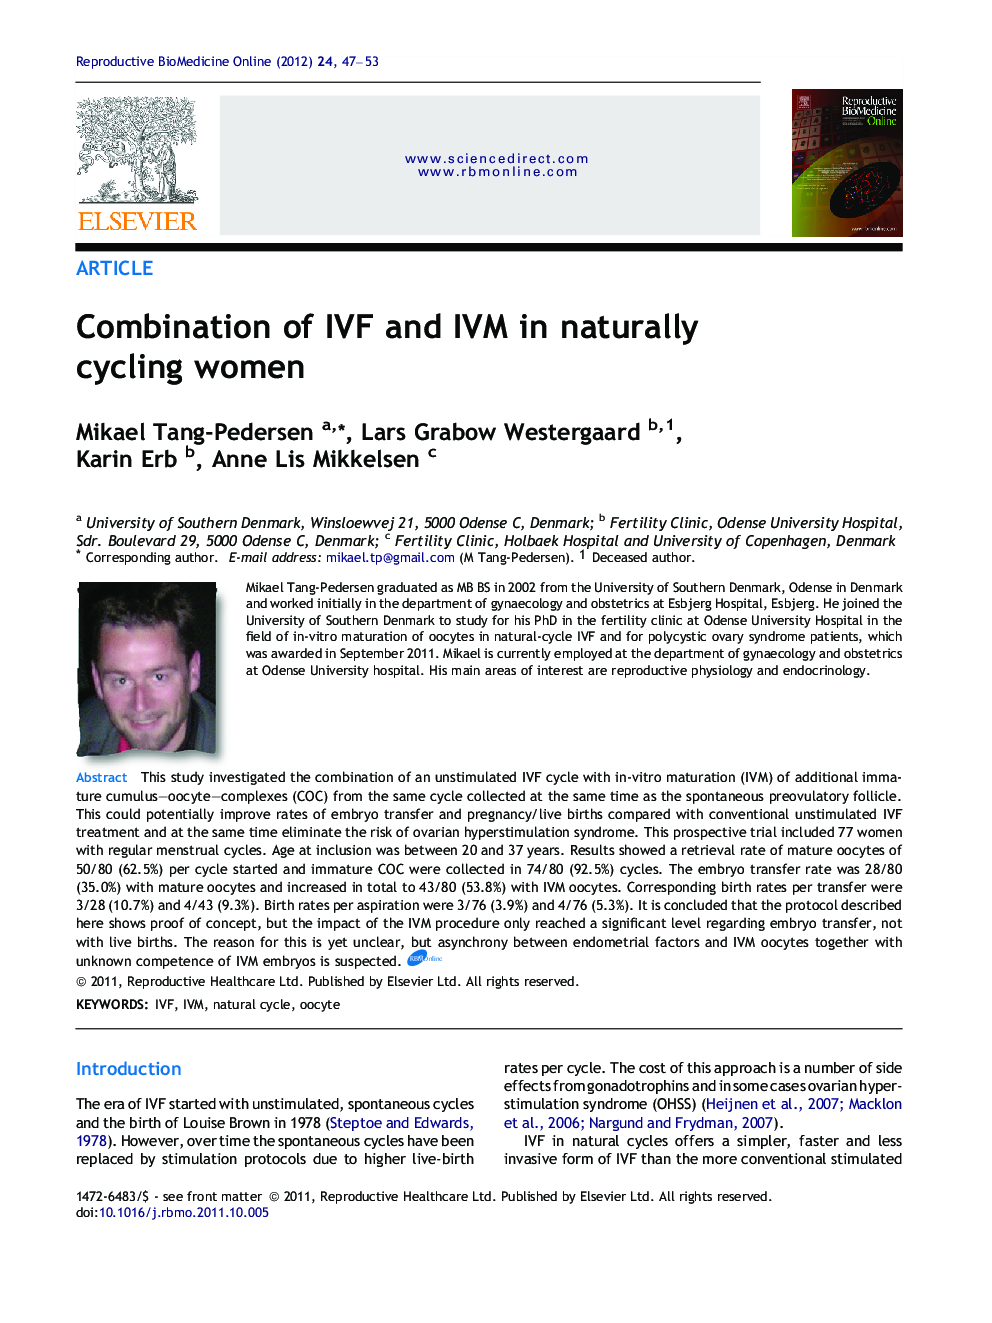 Combination of IVF and IVM in naturally cycling women